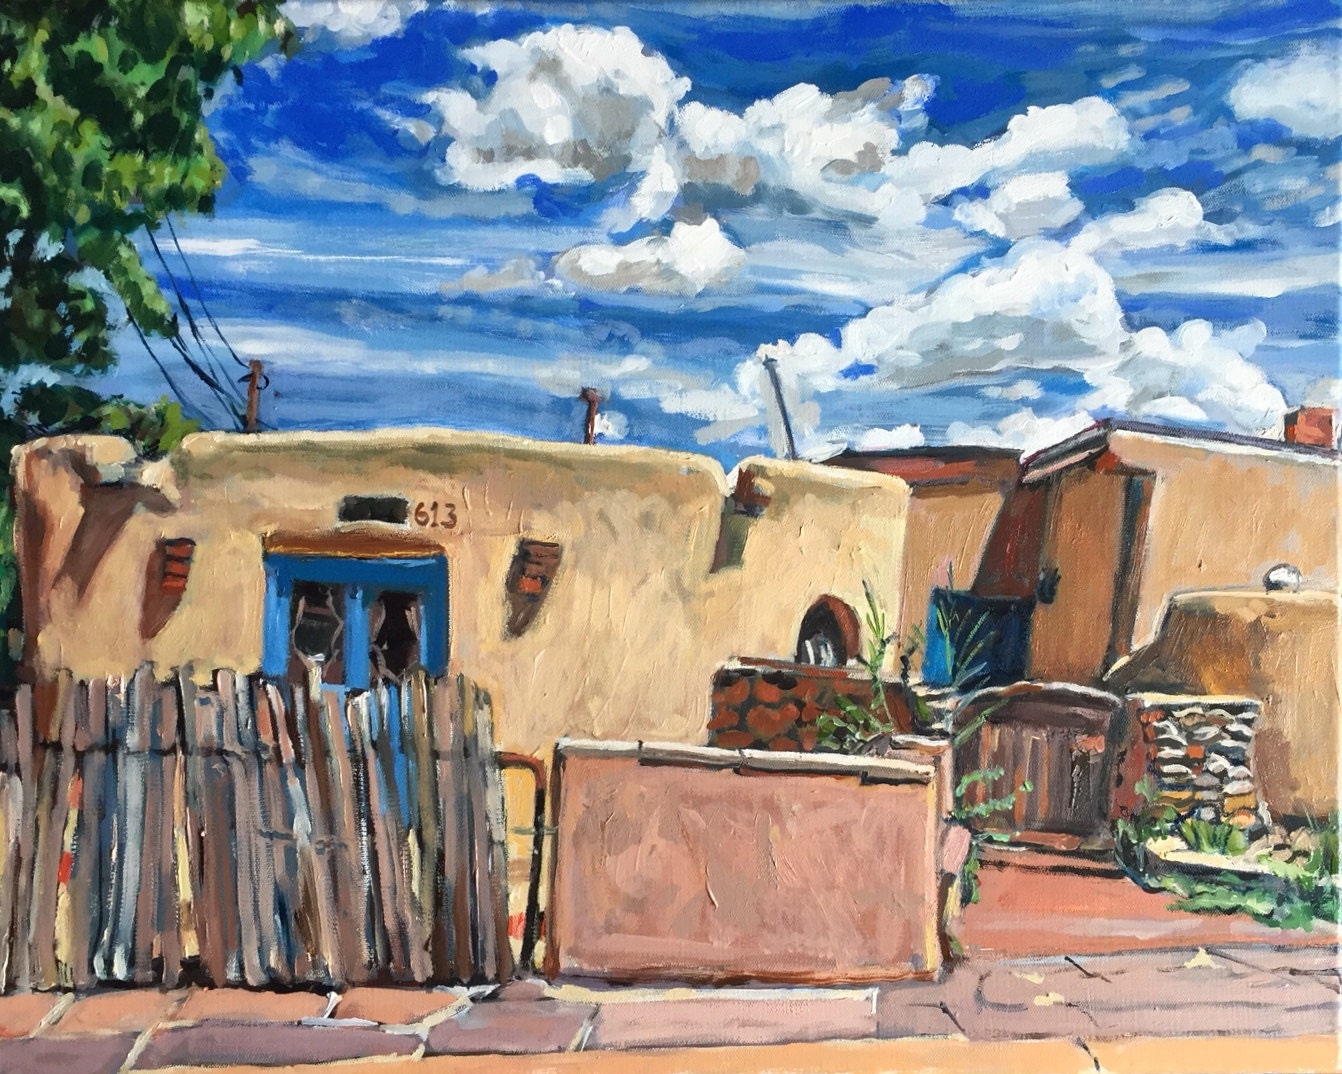 Santa Fe Painting Adobe and Clouds Southwestern Architecture